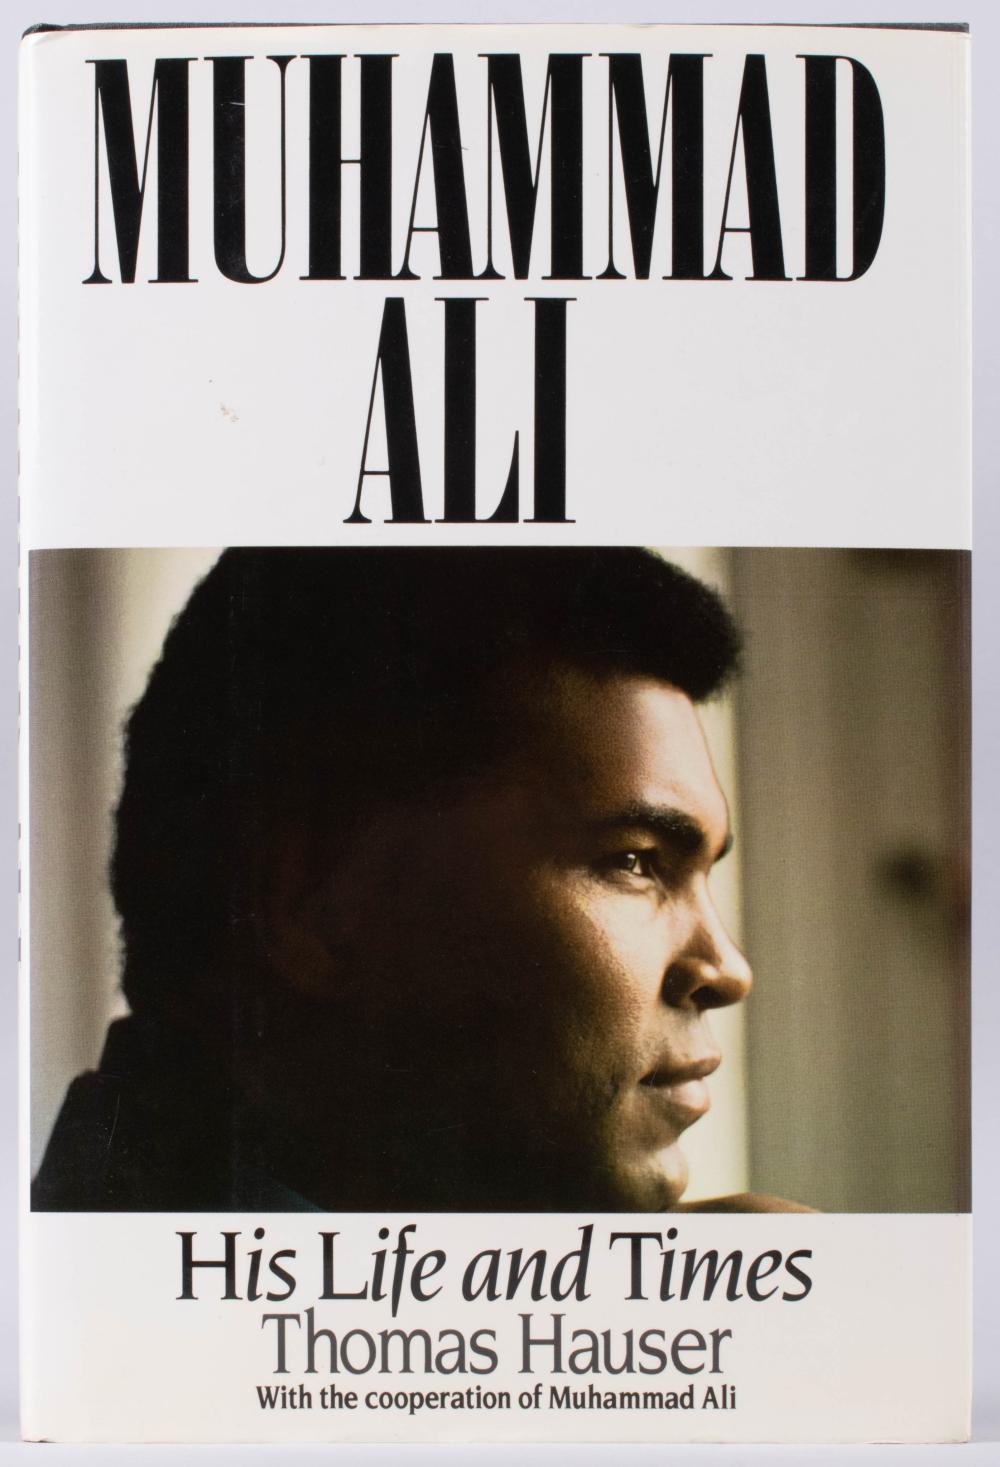 MUHAMMAD ALI HIS LIFE AND TIMES  33ce4c